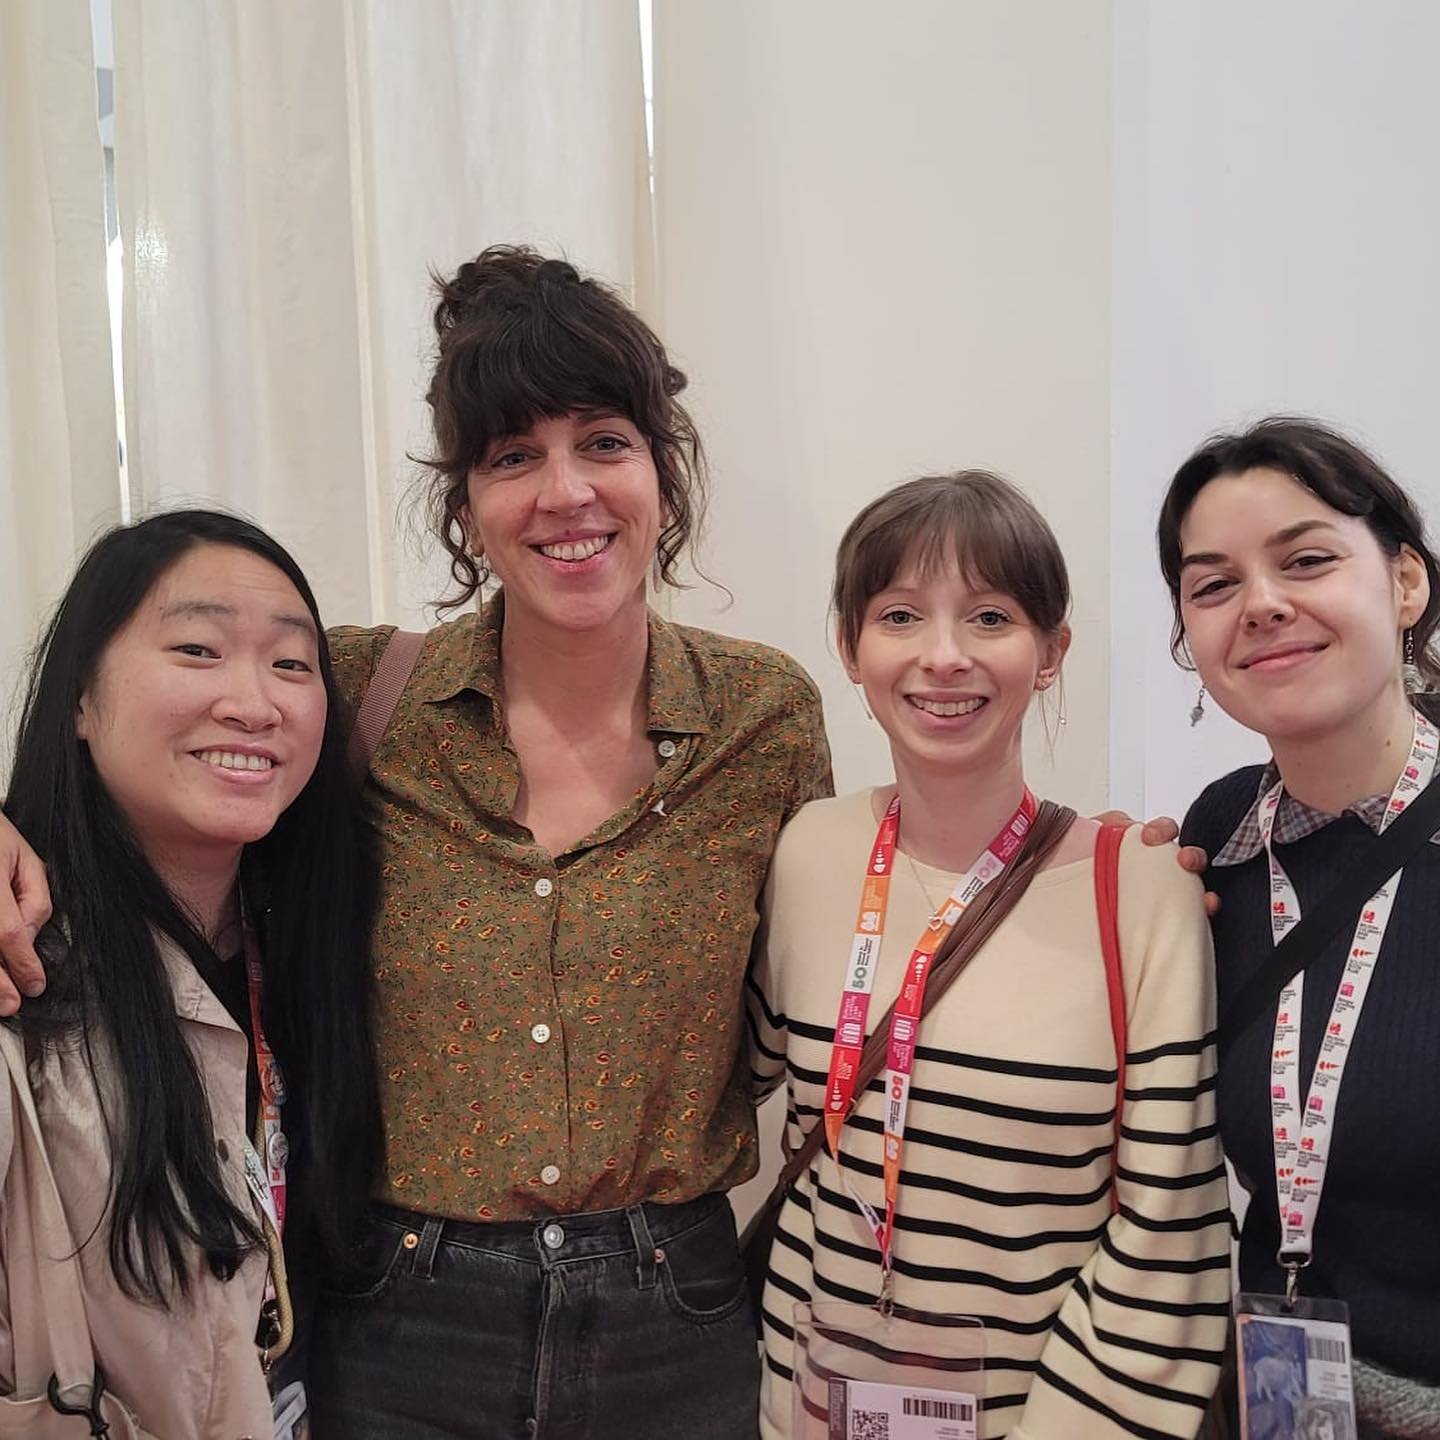 Some highlights from @bolognachildrensbookfair day two! 🌞

In no particular order...

📍Immensely grateful to have met one of my favourite illustrators @felicita.sala after her inspiring Masterclass in the morning. This was also mine and @frankiedra